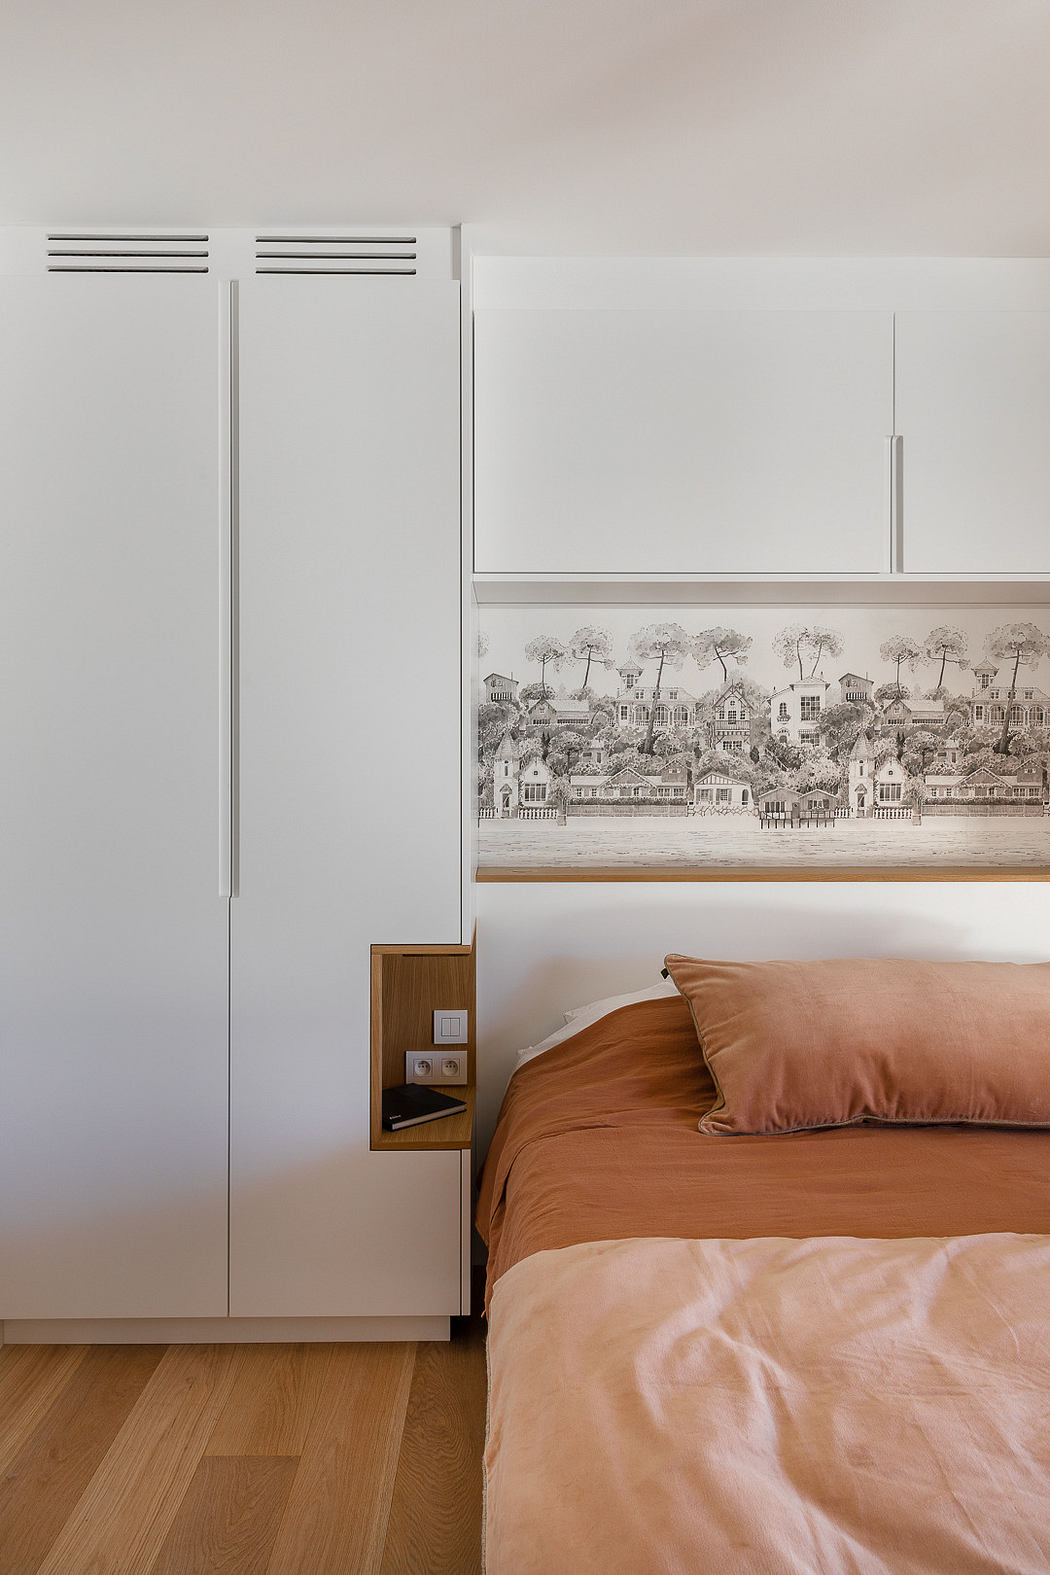 Minimalist bedroom with white closet, wooden floor, and framed artwork.